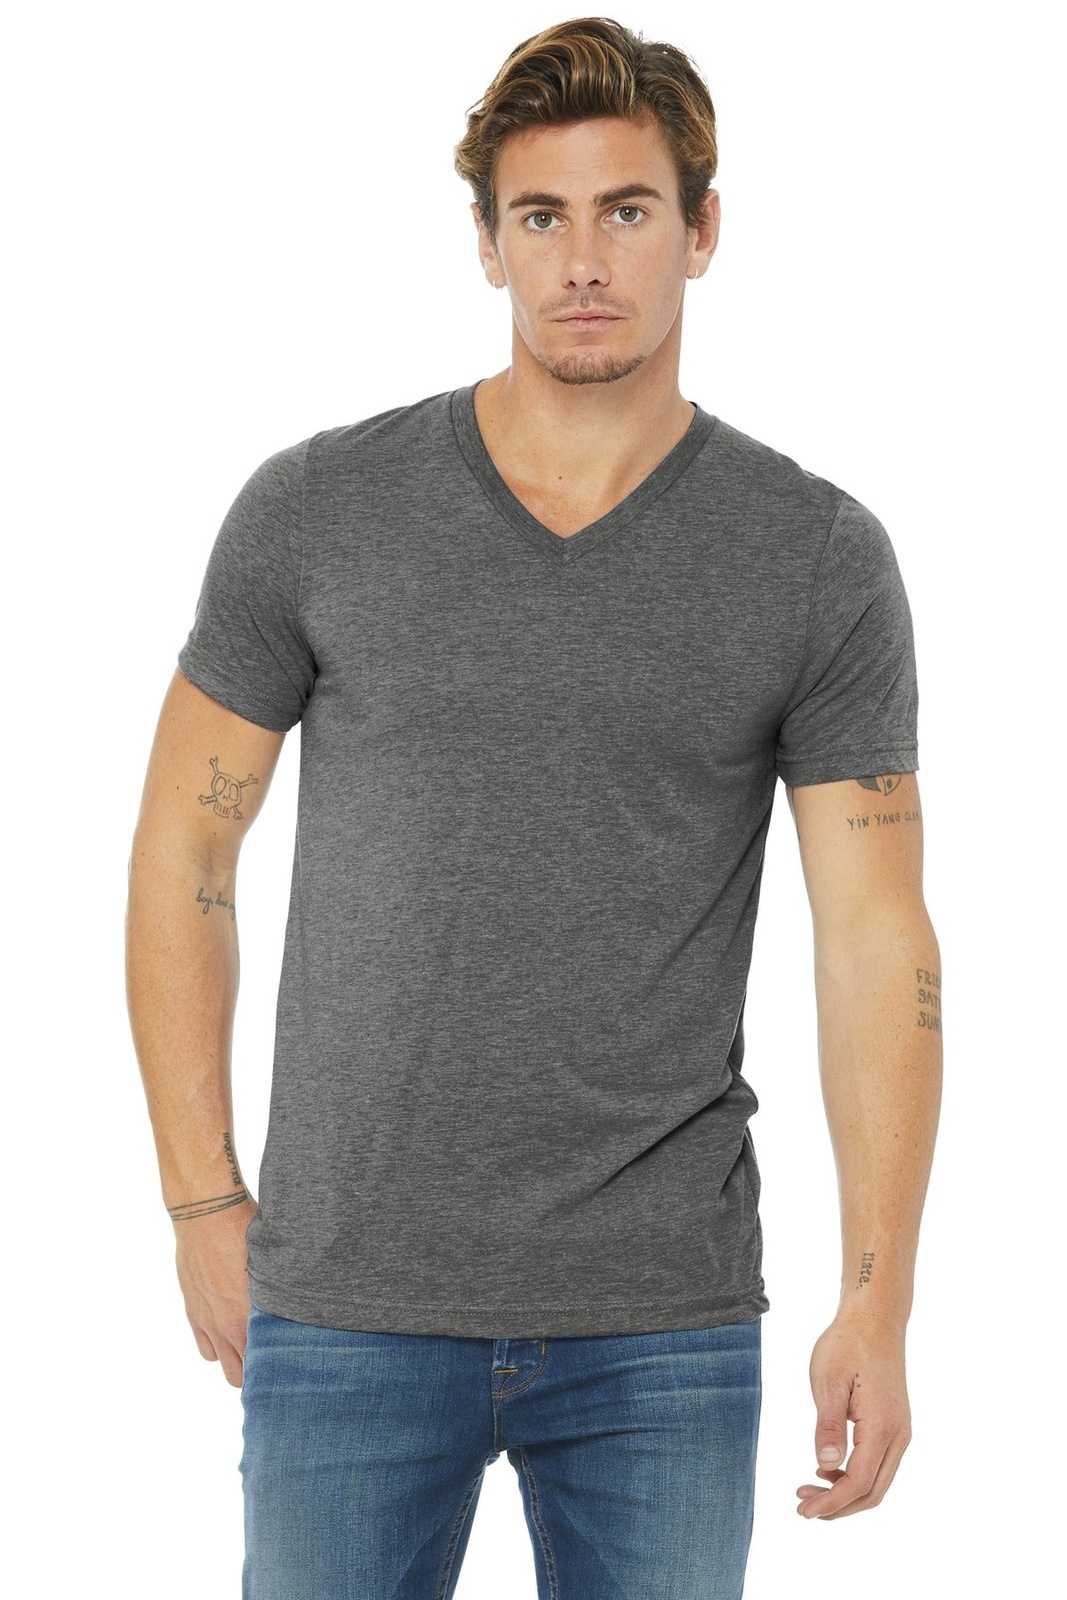 Bella + Canvas 3415 Unisex Triblend Short Sleeve V-Neck Tee - Athletic Gray Triblend - HIT a Double